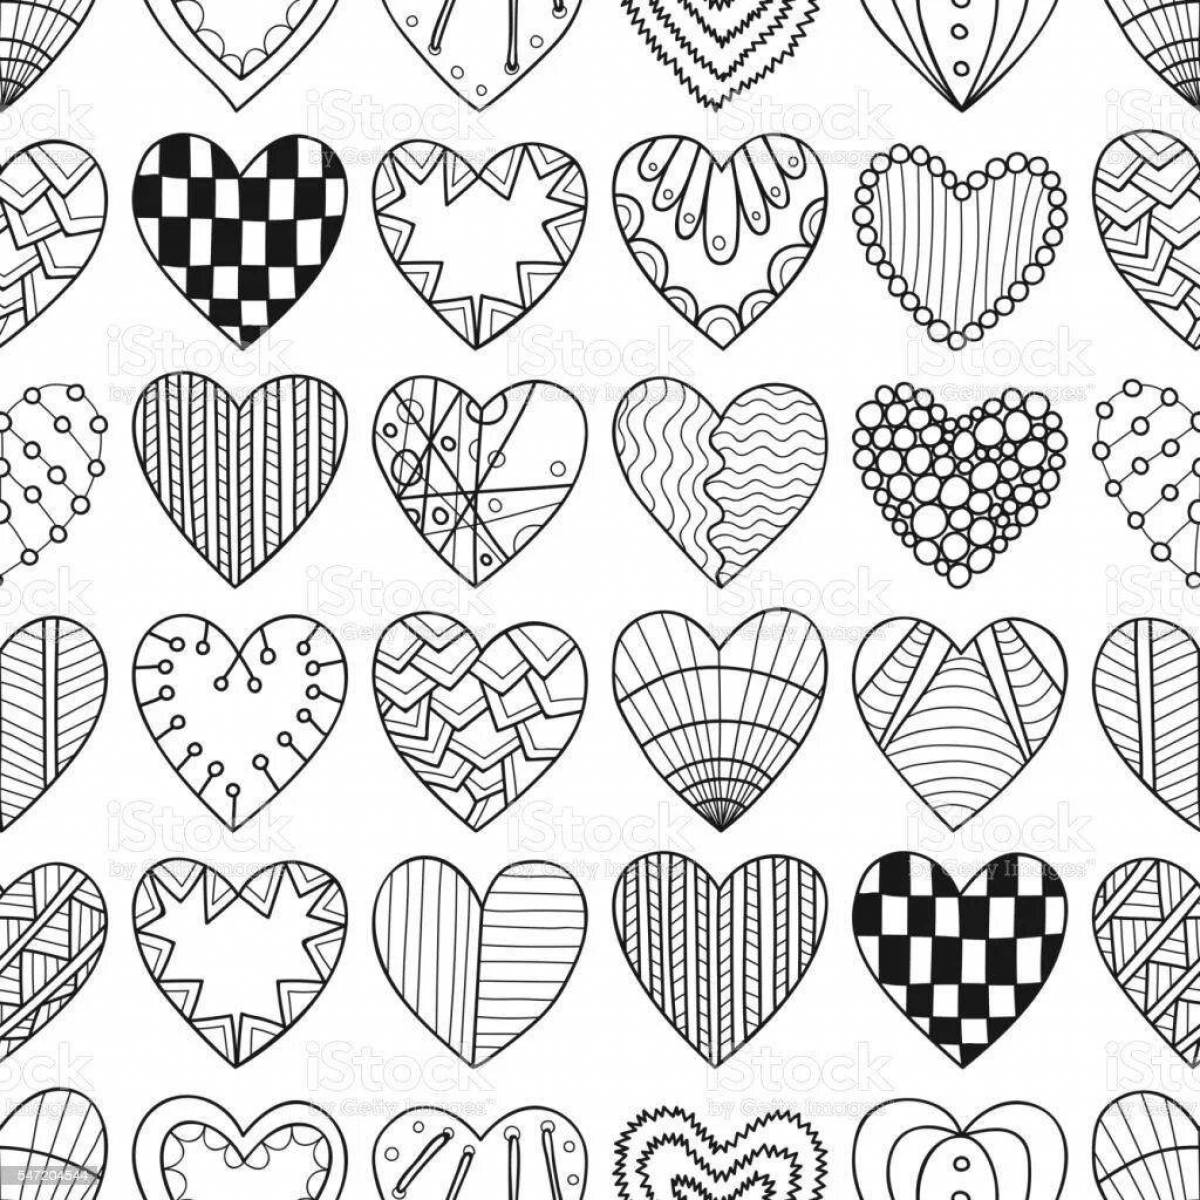 Flowering heart and star coloring page